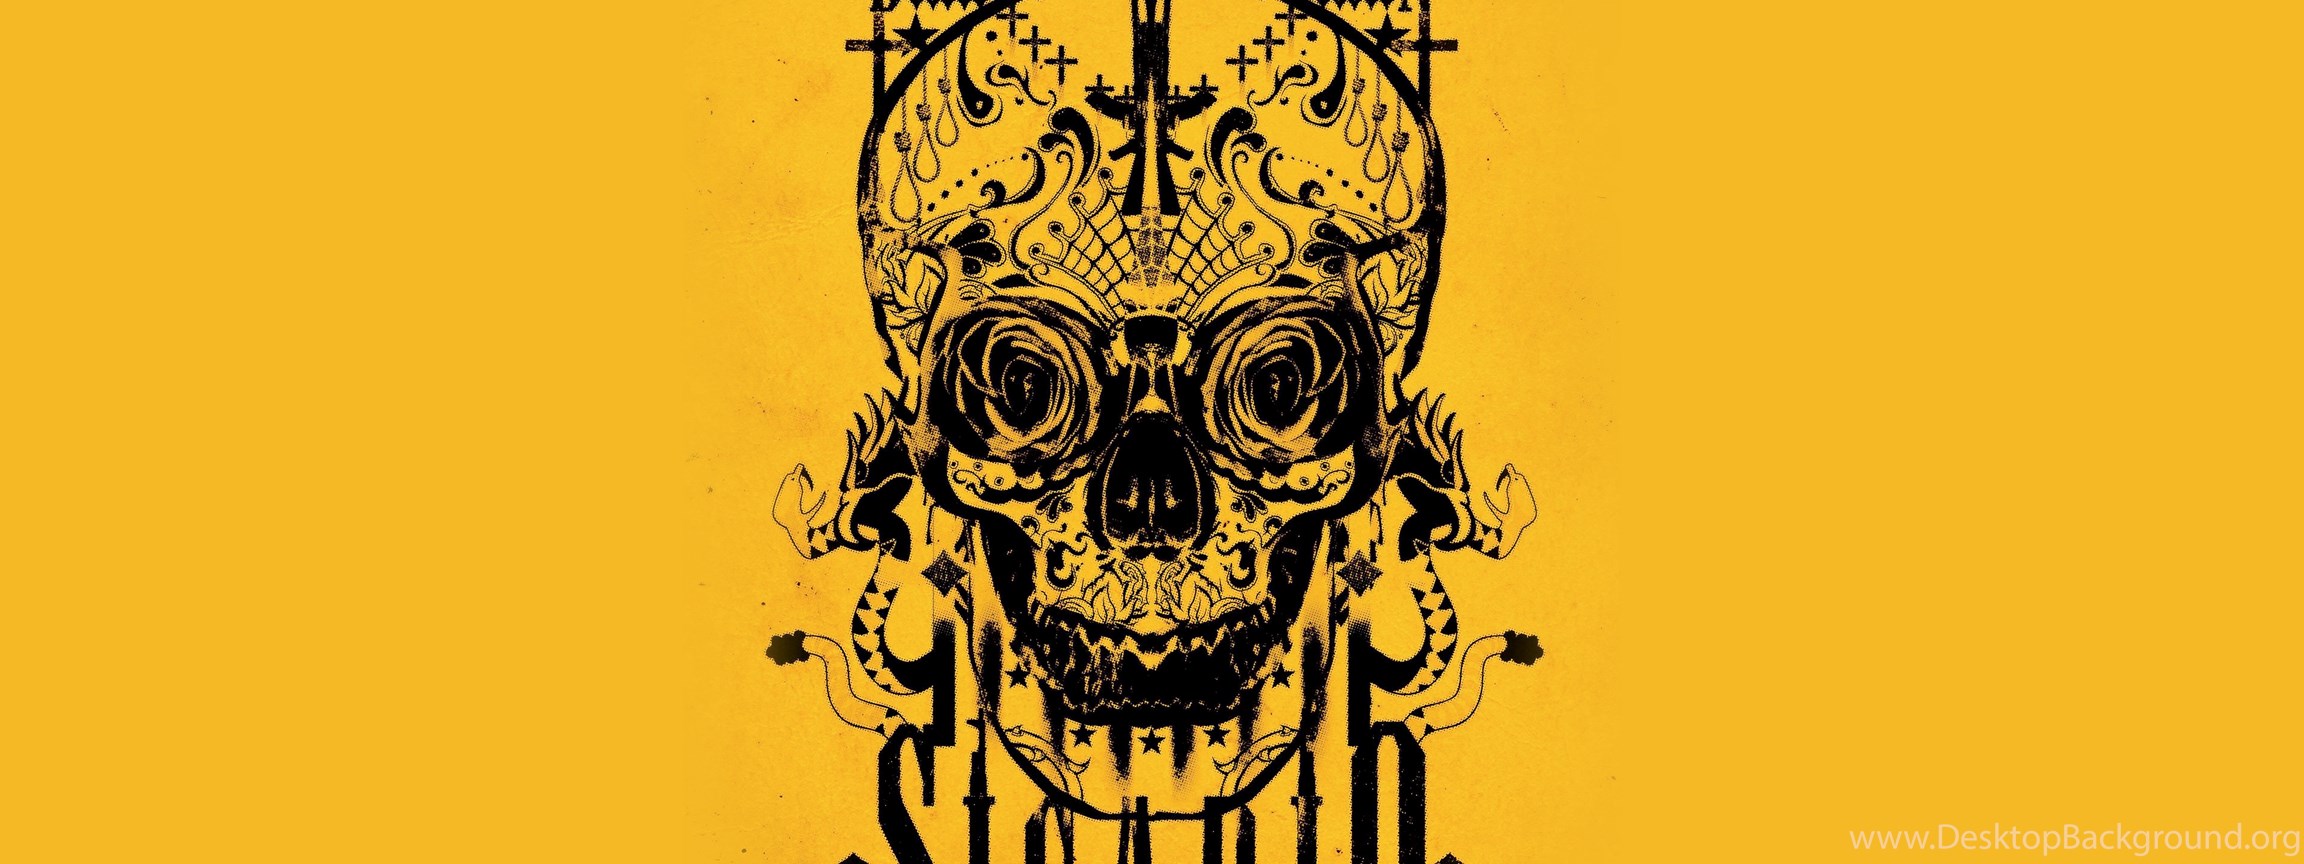 Download Sicario 2015 Official Movie Poster Wallpapers HD Online Movies ......